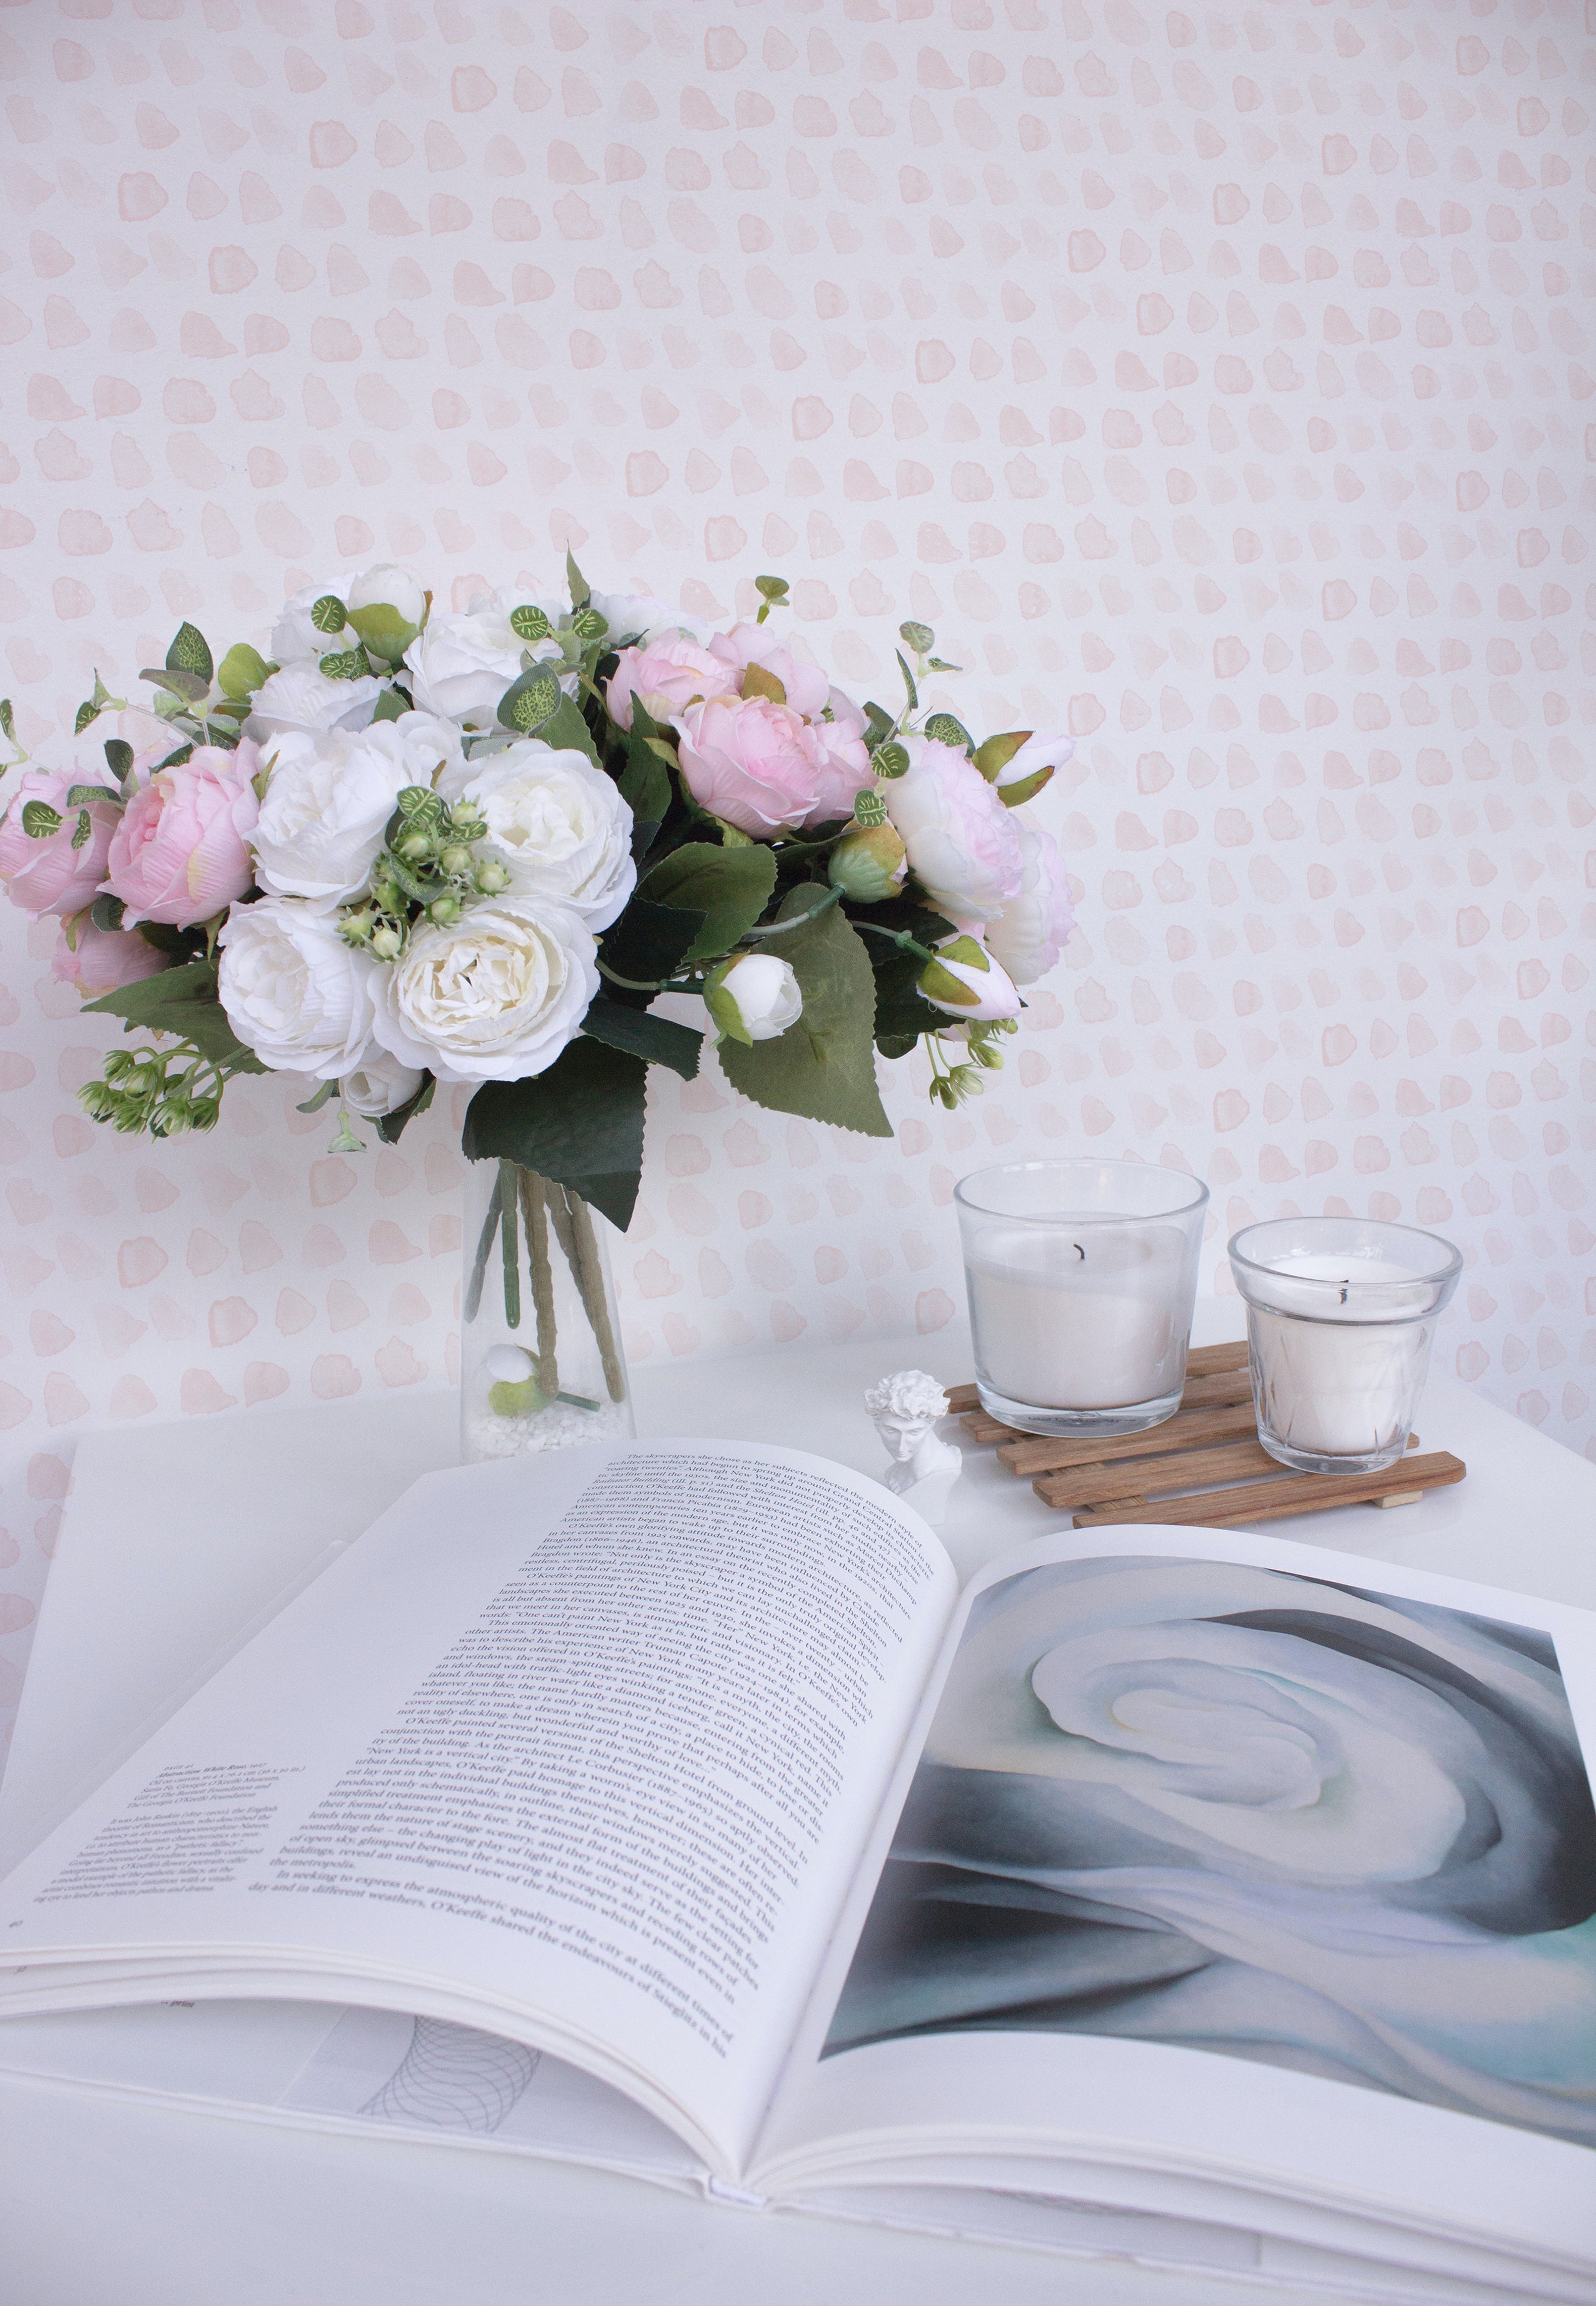 A serene setting featuring the Handpainted Dots Wallpaper as a backdrop. A vase filled with an arrangement of lush white and pink flowers is placed to the left, with a wooden tray holding two white candles in glass holders below. An open book with visible text lies in the foreground, showcasing an artistic image on the right page.